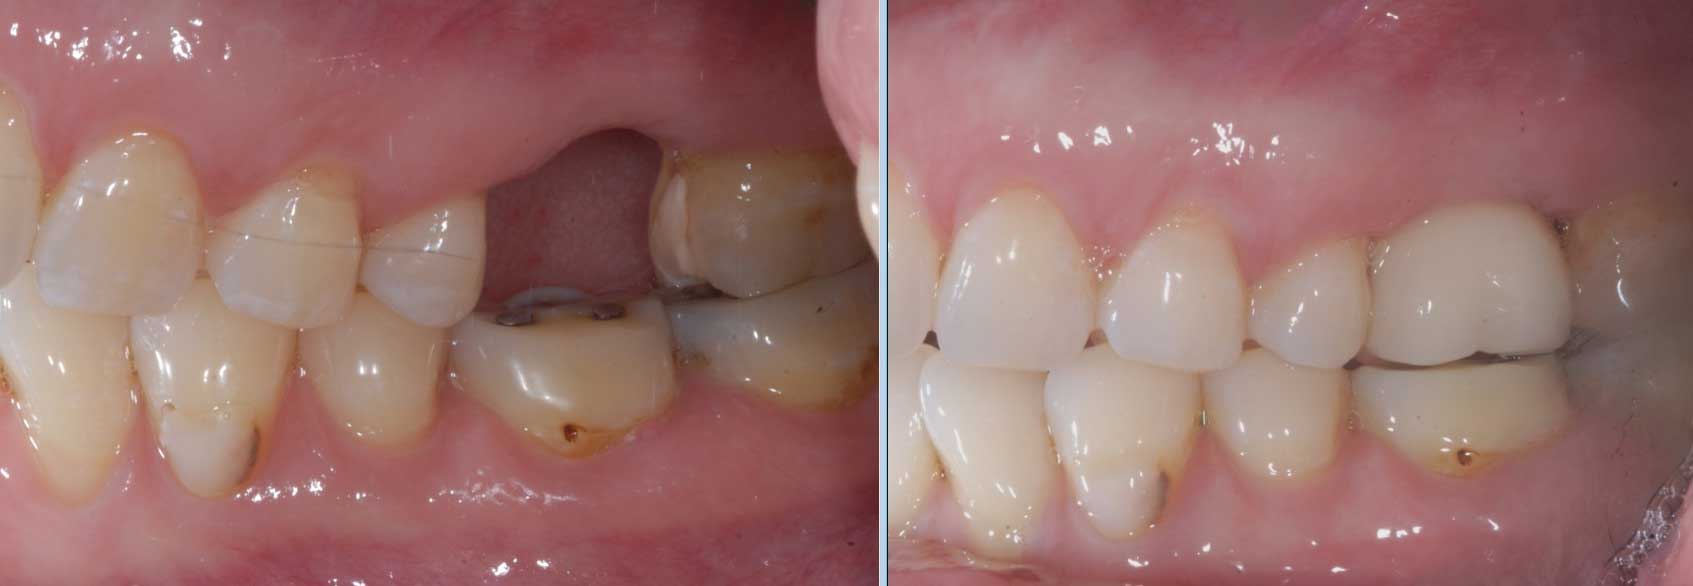 Chatfield dental tooth implant image 3